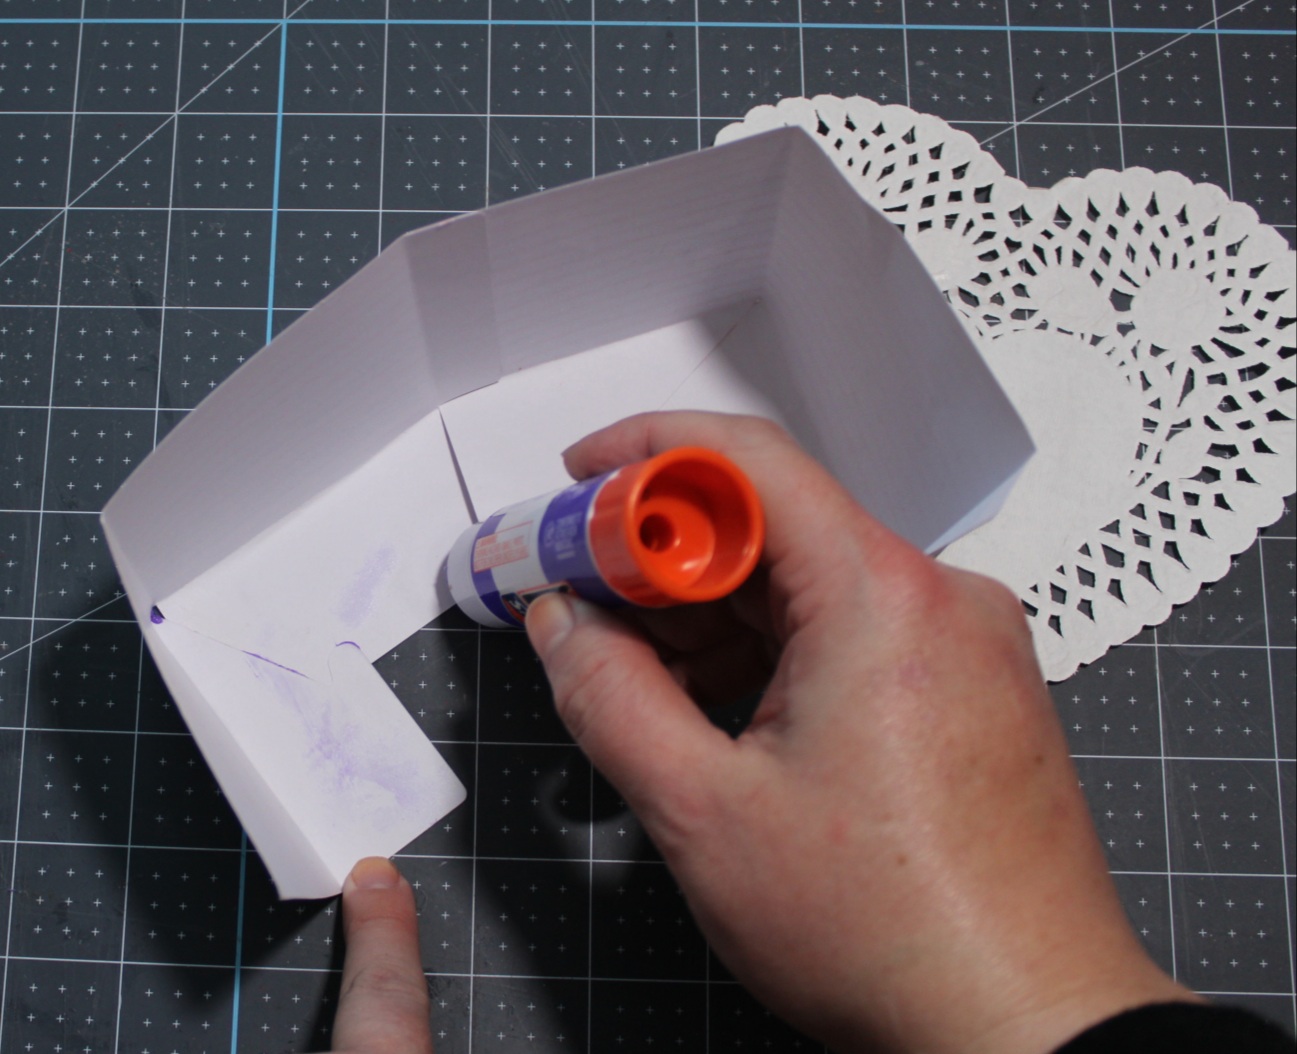 Adding glue to the folded cardstock to glue the box together for the Valentines Day friends gift.